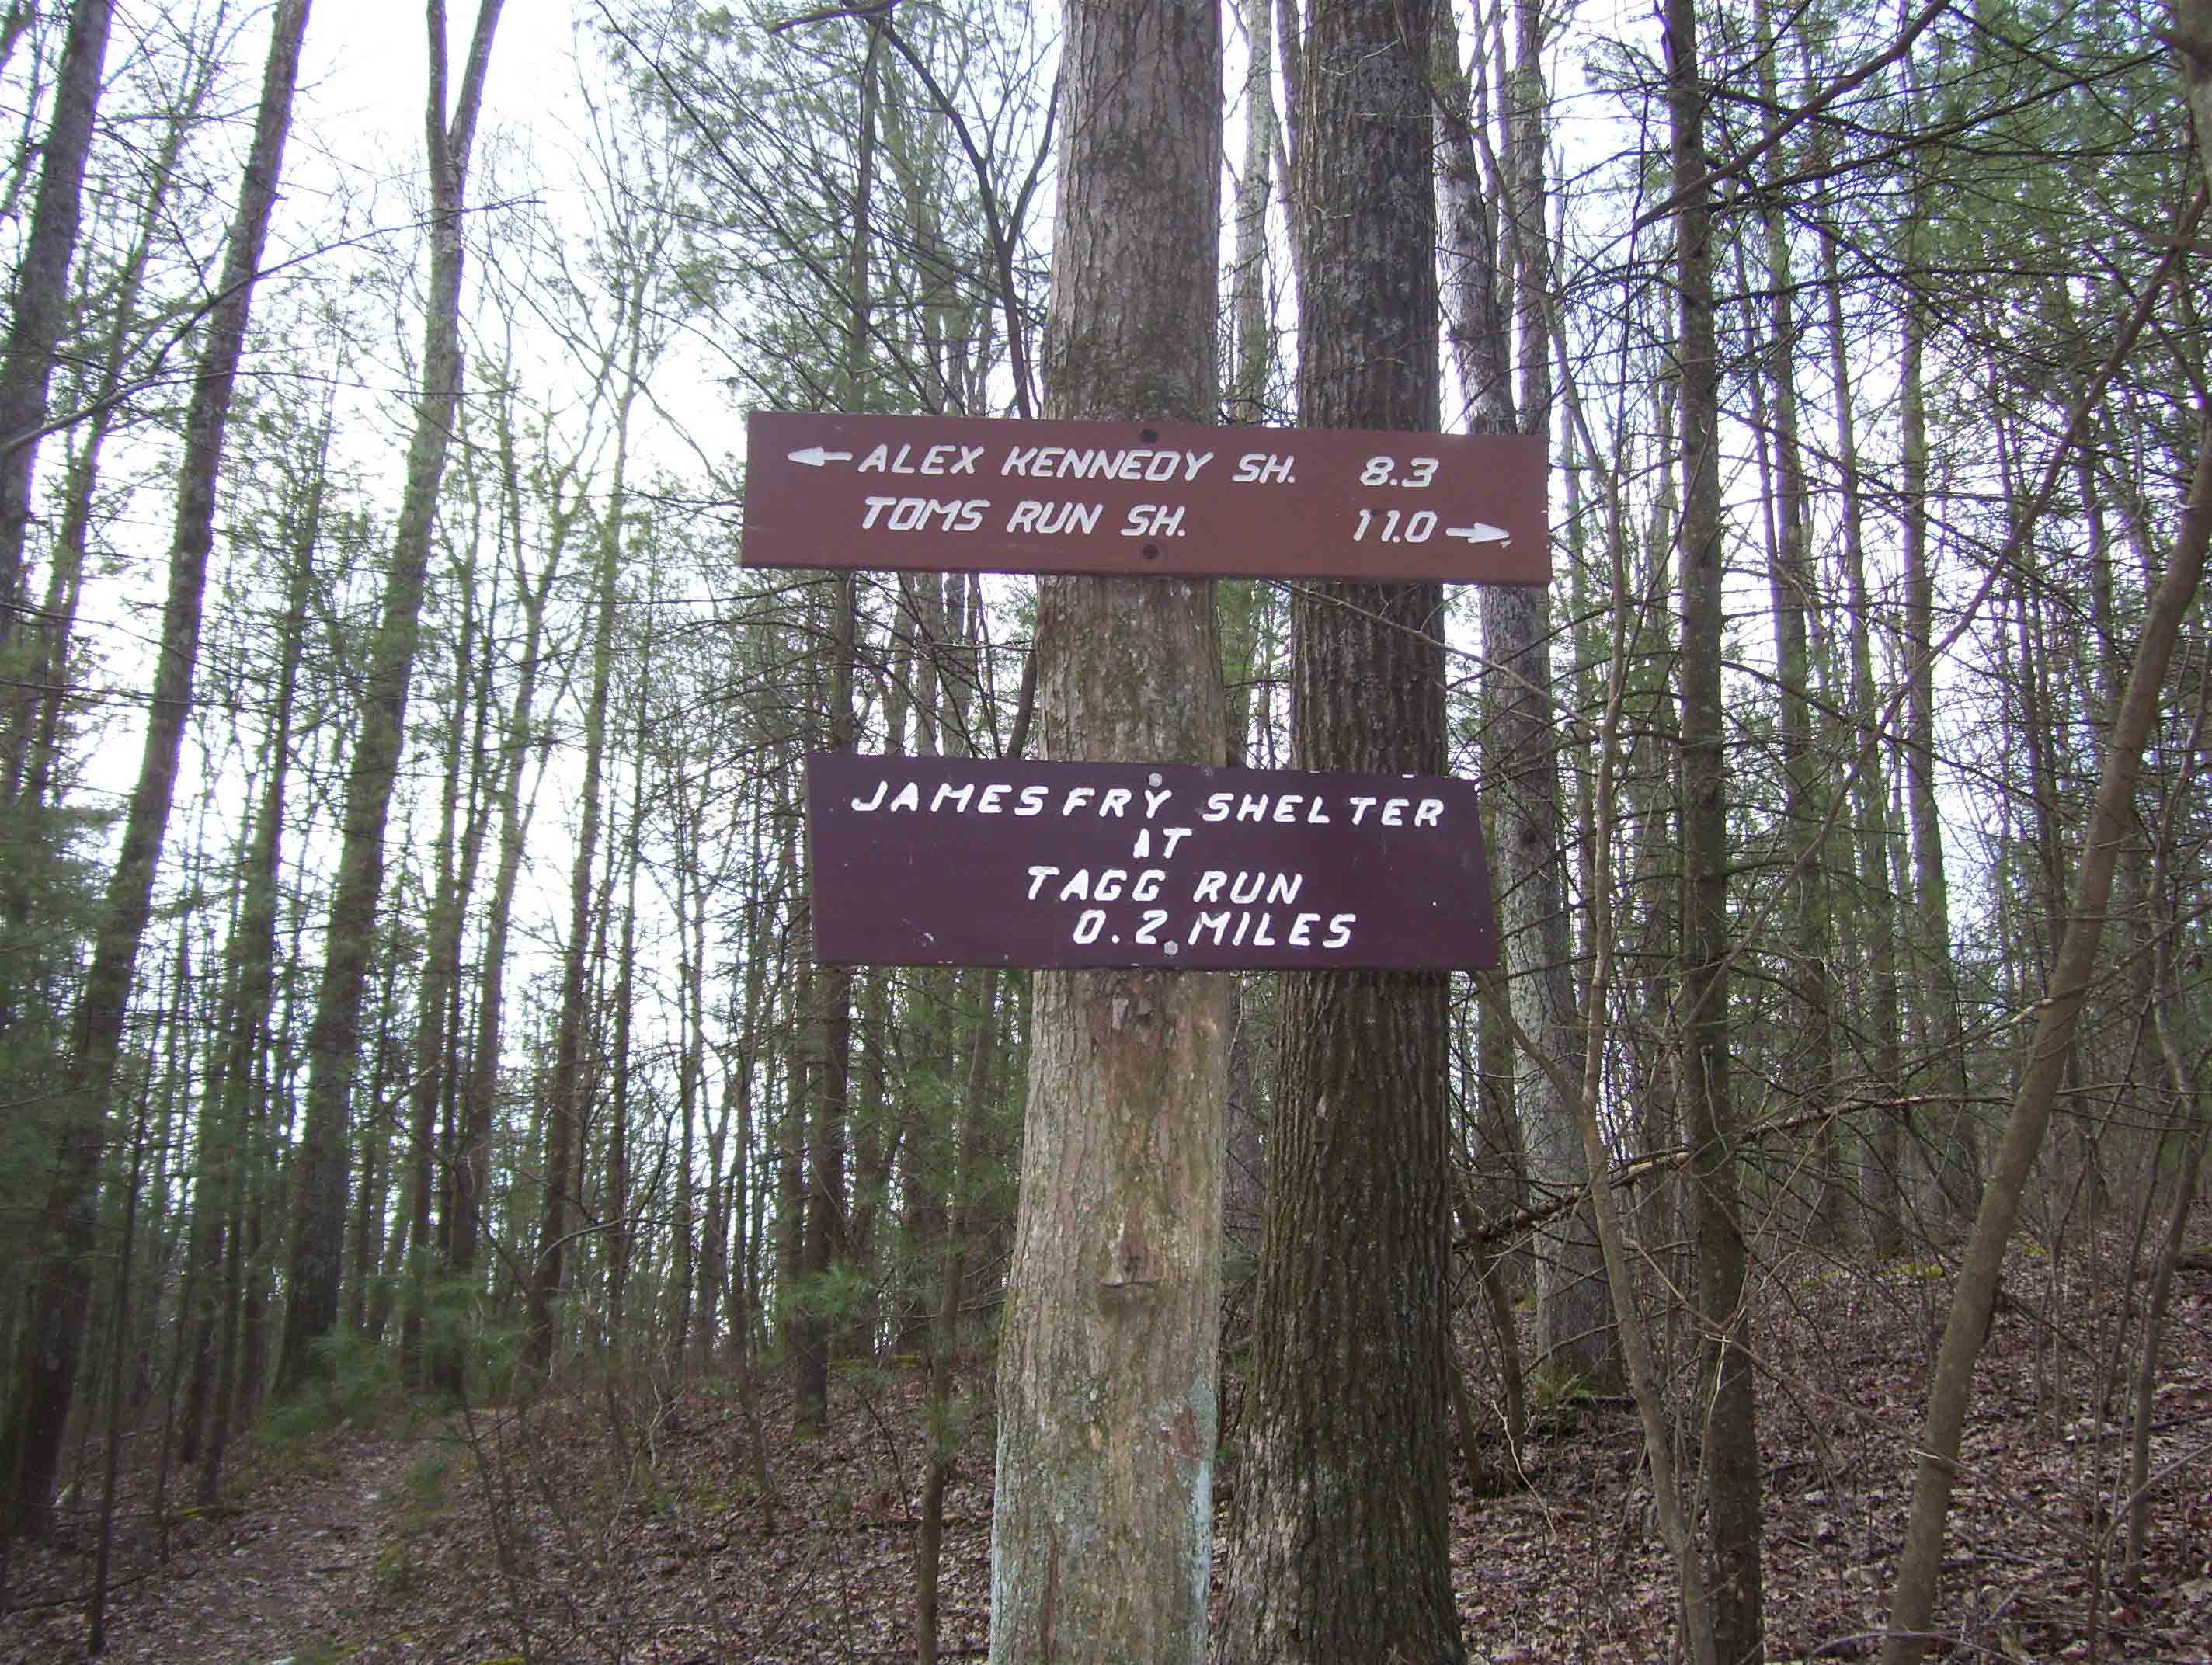 mm 3.2  New sign (2008) at the blue-blazed trail to the former Tagg Run Shelter, now called the James Fry Shelter at Tagg Run.  Courtesy dlcul@conncoll.edu